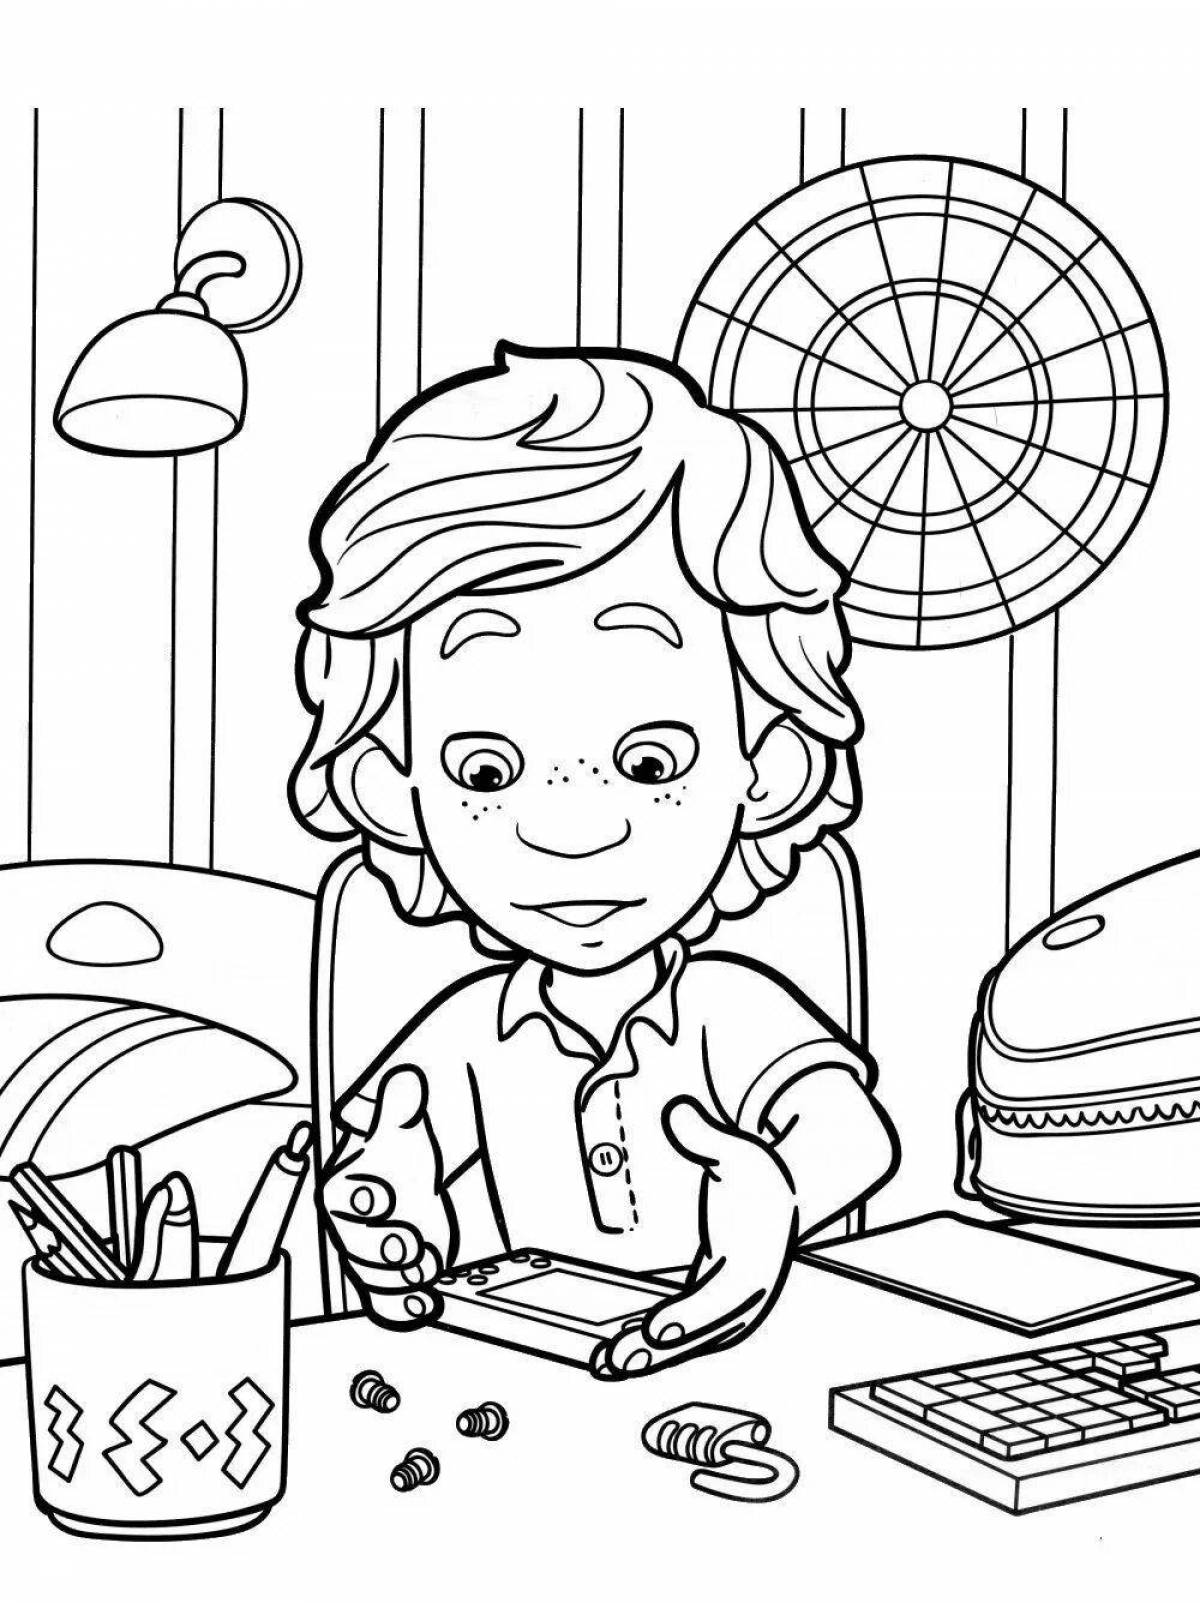 Adorable fixies coloring pages for boys